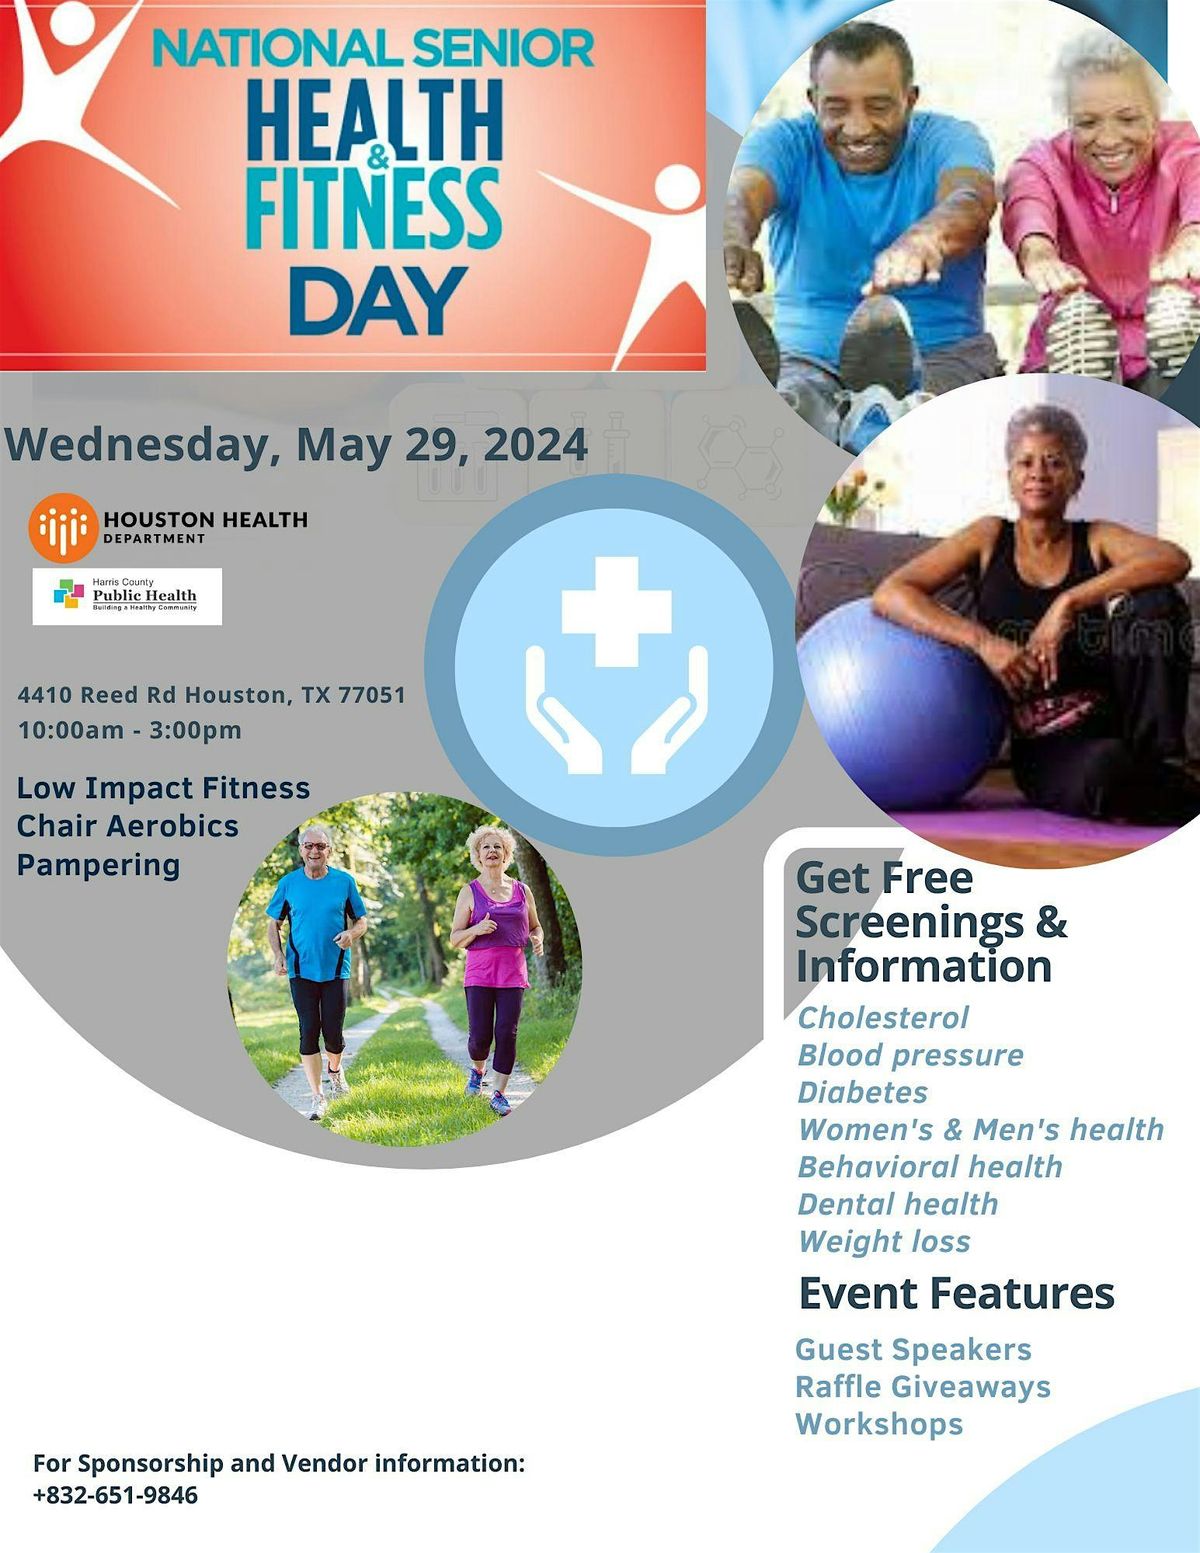 The National Senior Fitness Health and Wellness Resourse Expo